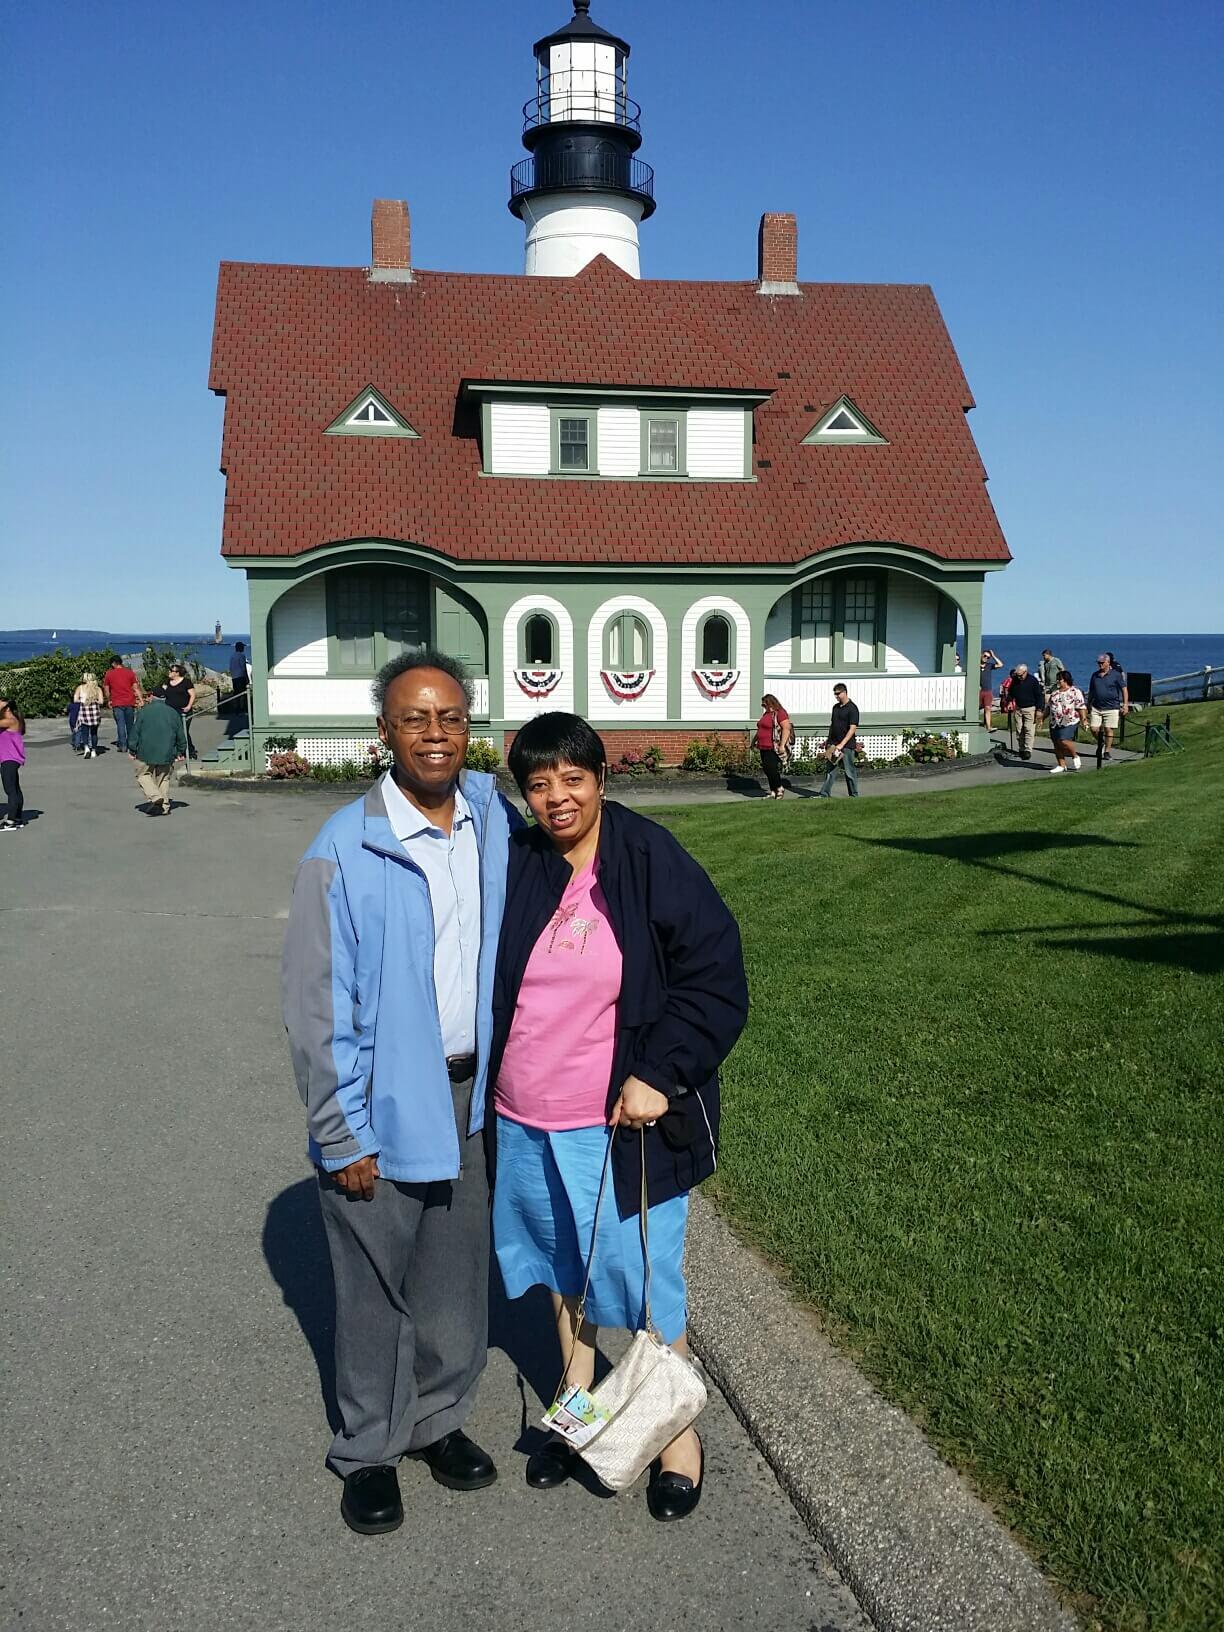 Edna King and husband standing in Maine